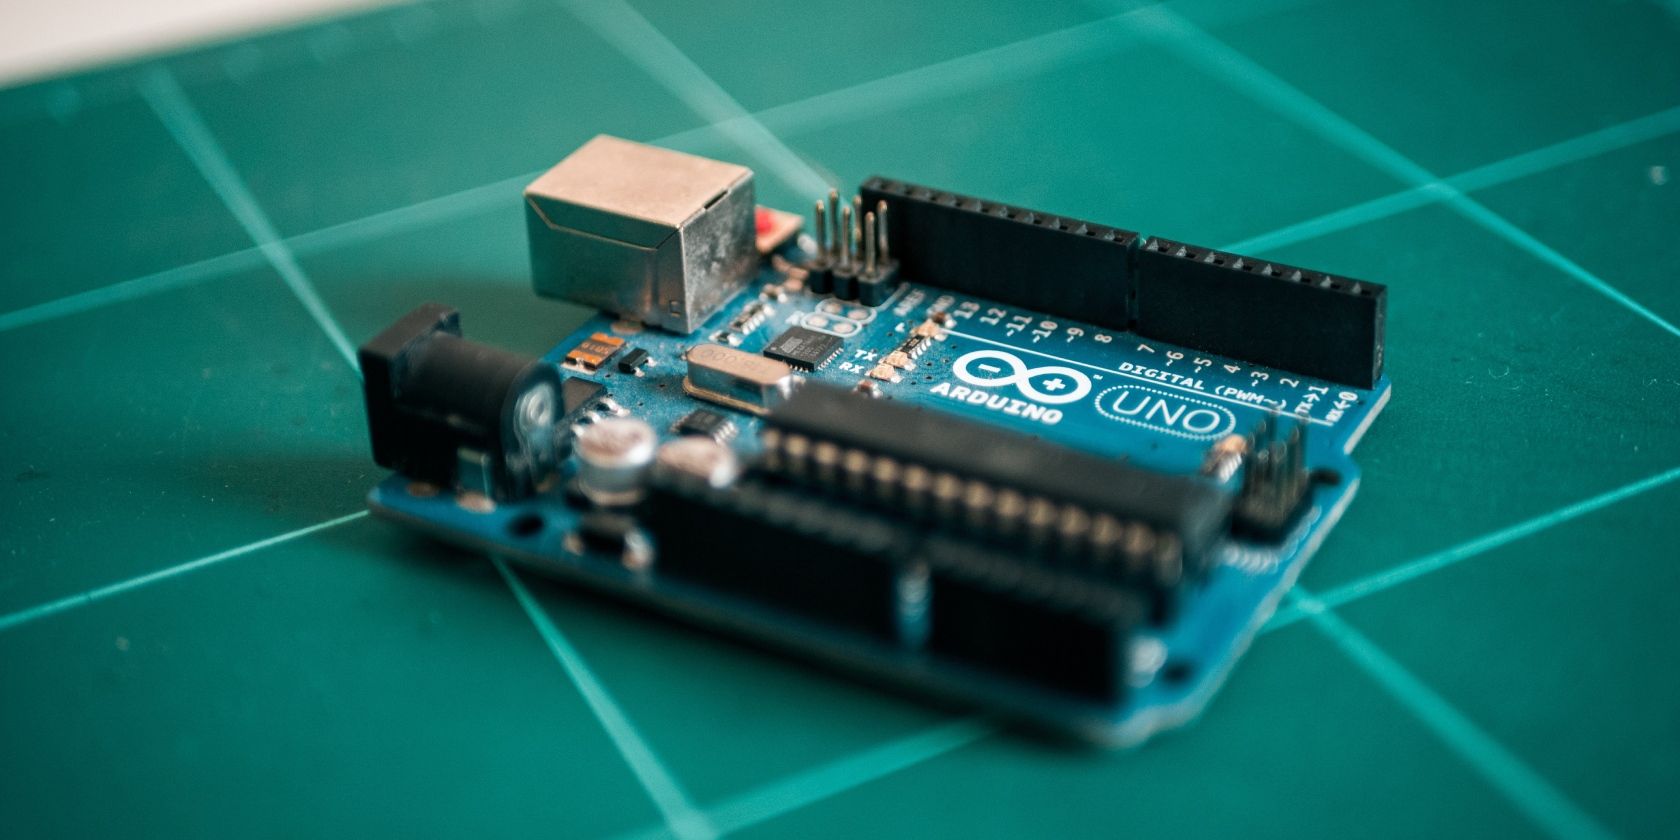 4 Arduino Simulators You Can Use in Your Electronics Projects